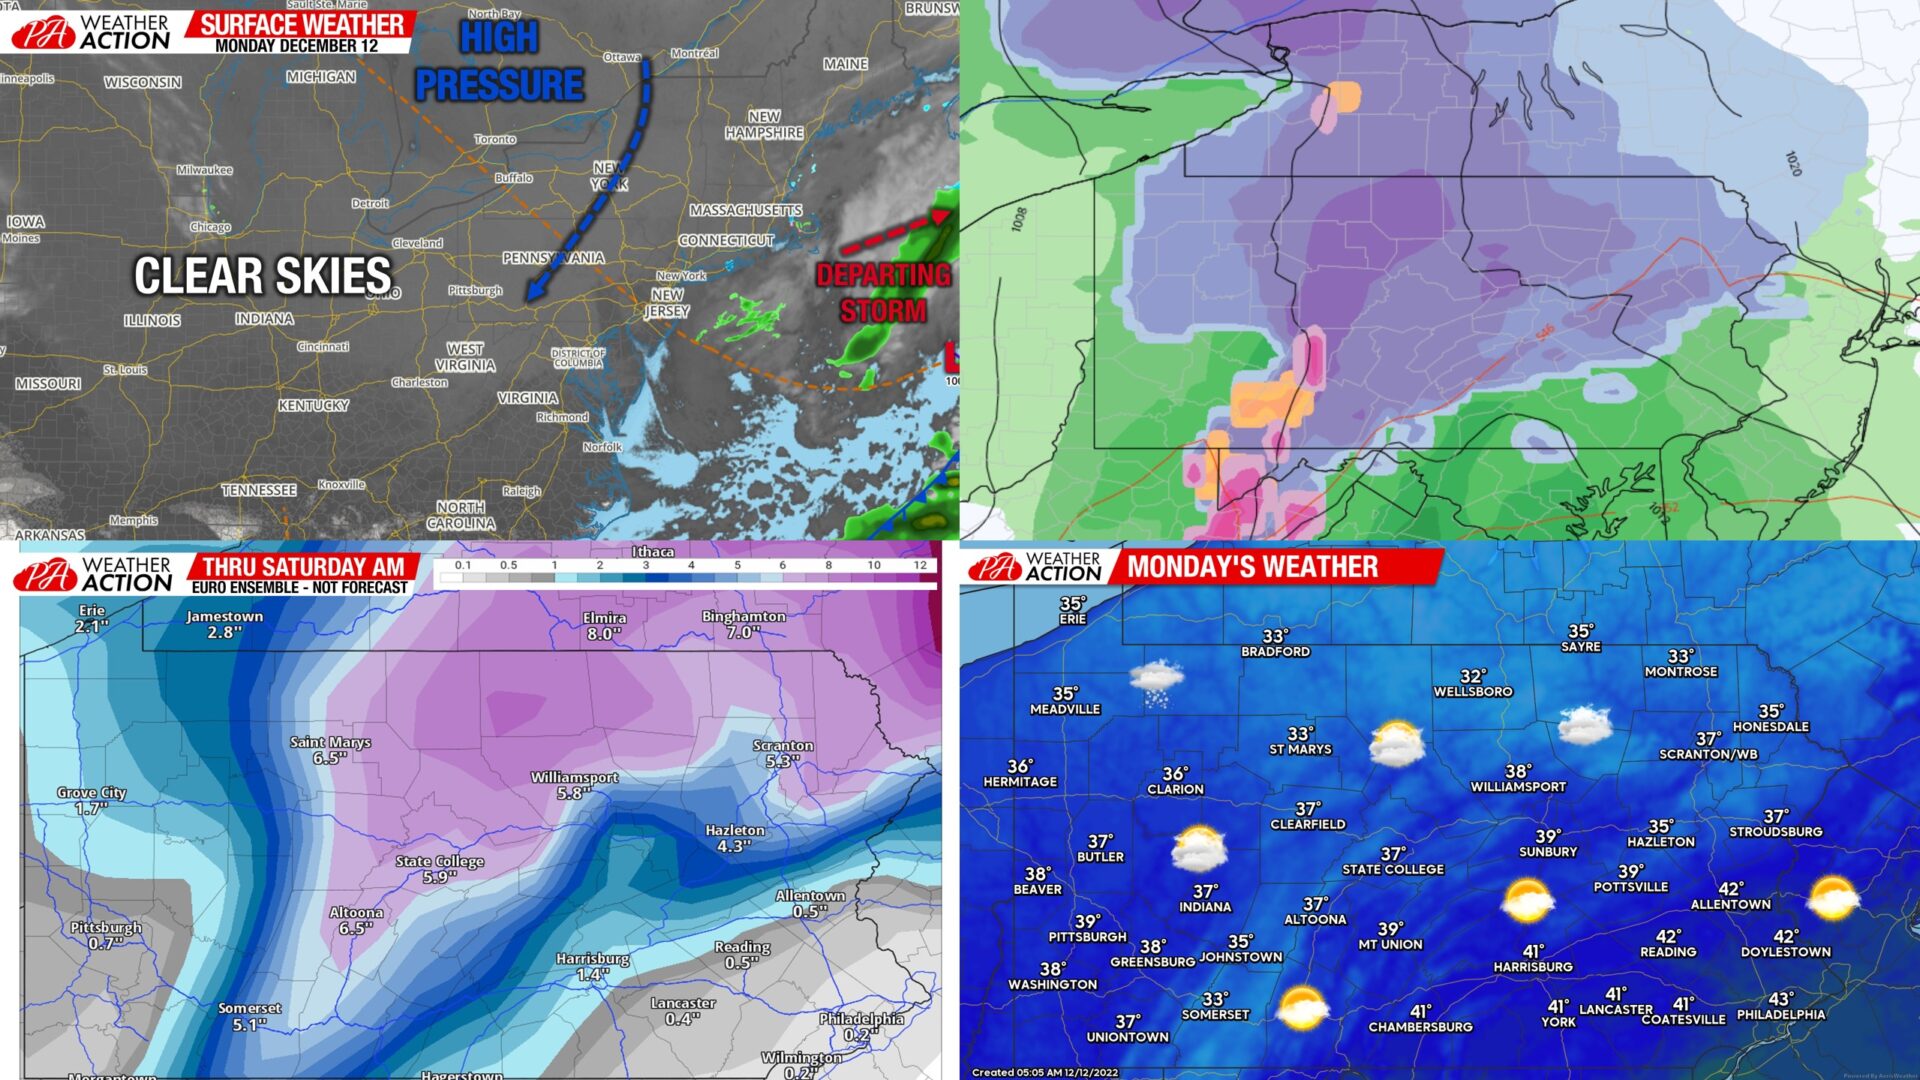 Monday December 12 Report: Cold & Clear Start to Week Before Messy Storm Thursday - Friday